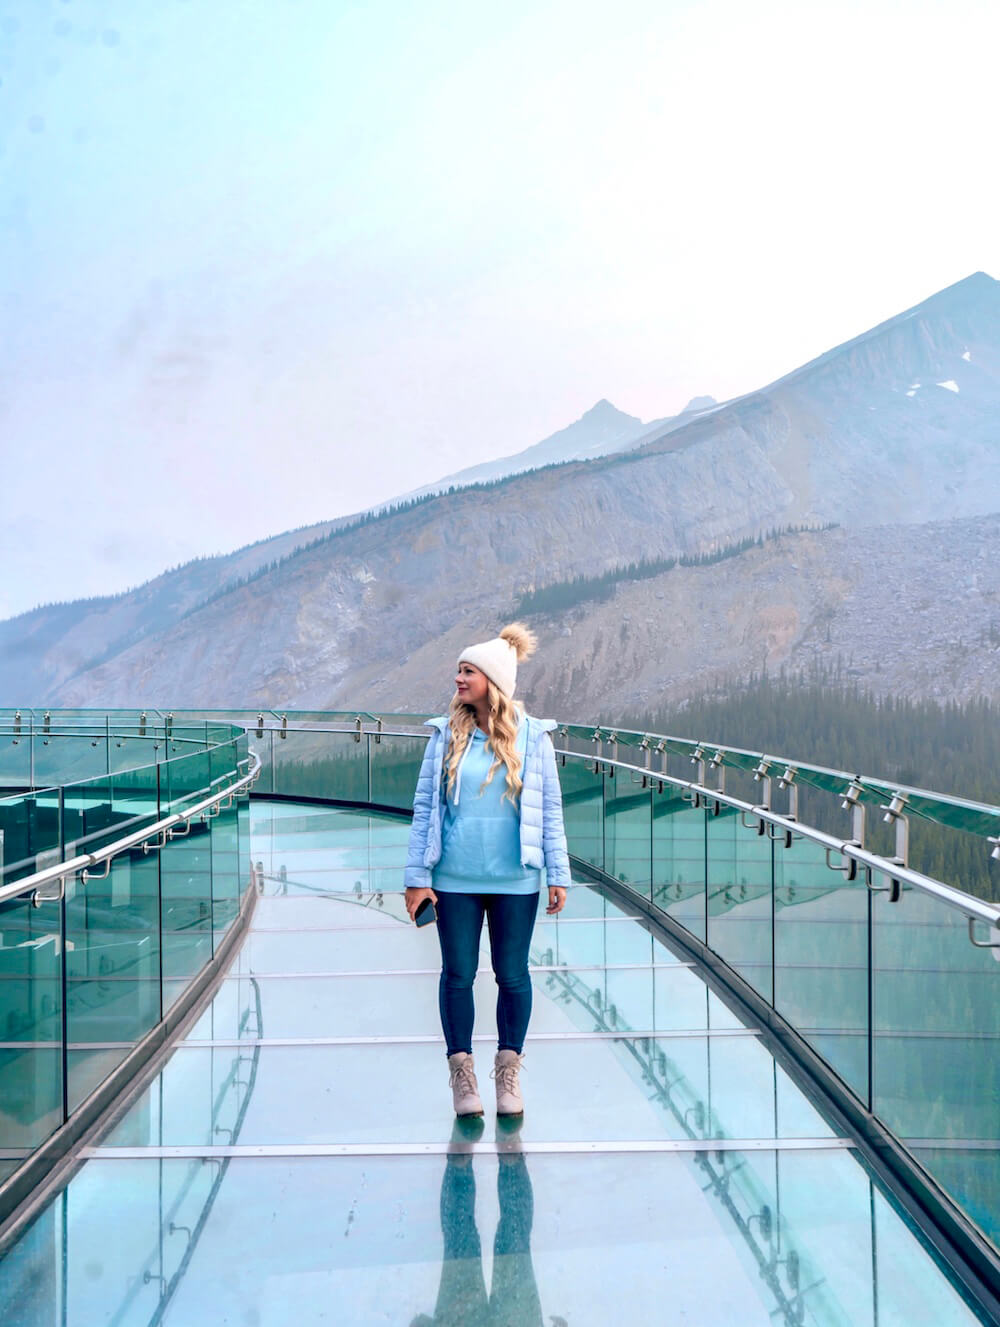 Planning a trip to Jasper National Park soon? Here's a local's guide to some of the best things to do in Jasper. From hikes and trails to adventure sports, family friendly excursions, dining experiences and more. You won't want to miss this guide of the best things to do and places to see in Jasper. Pictured here: Glacier Skywalk